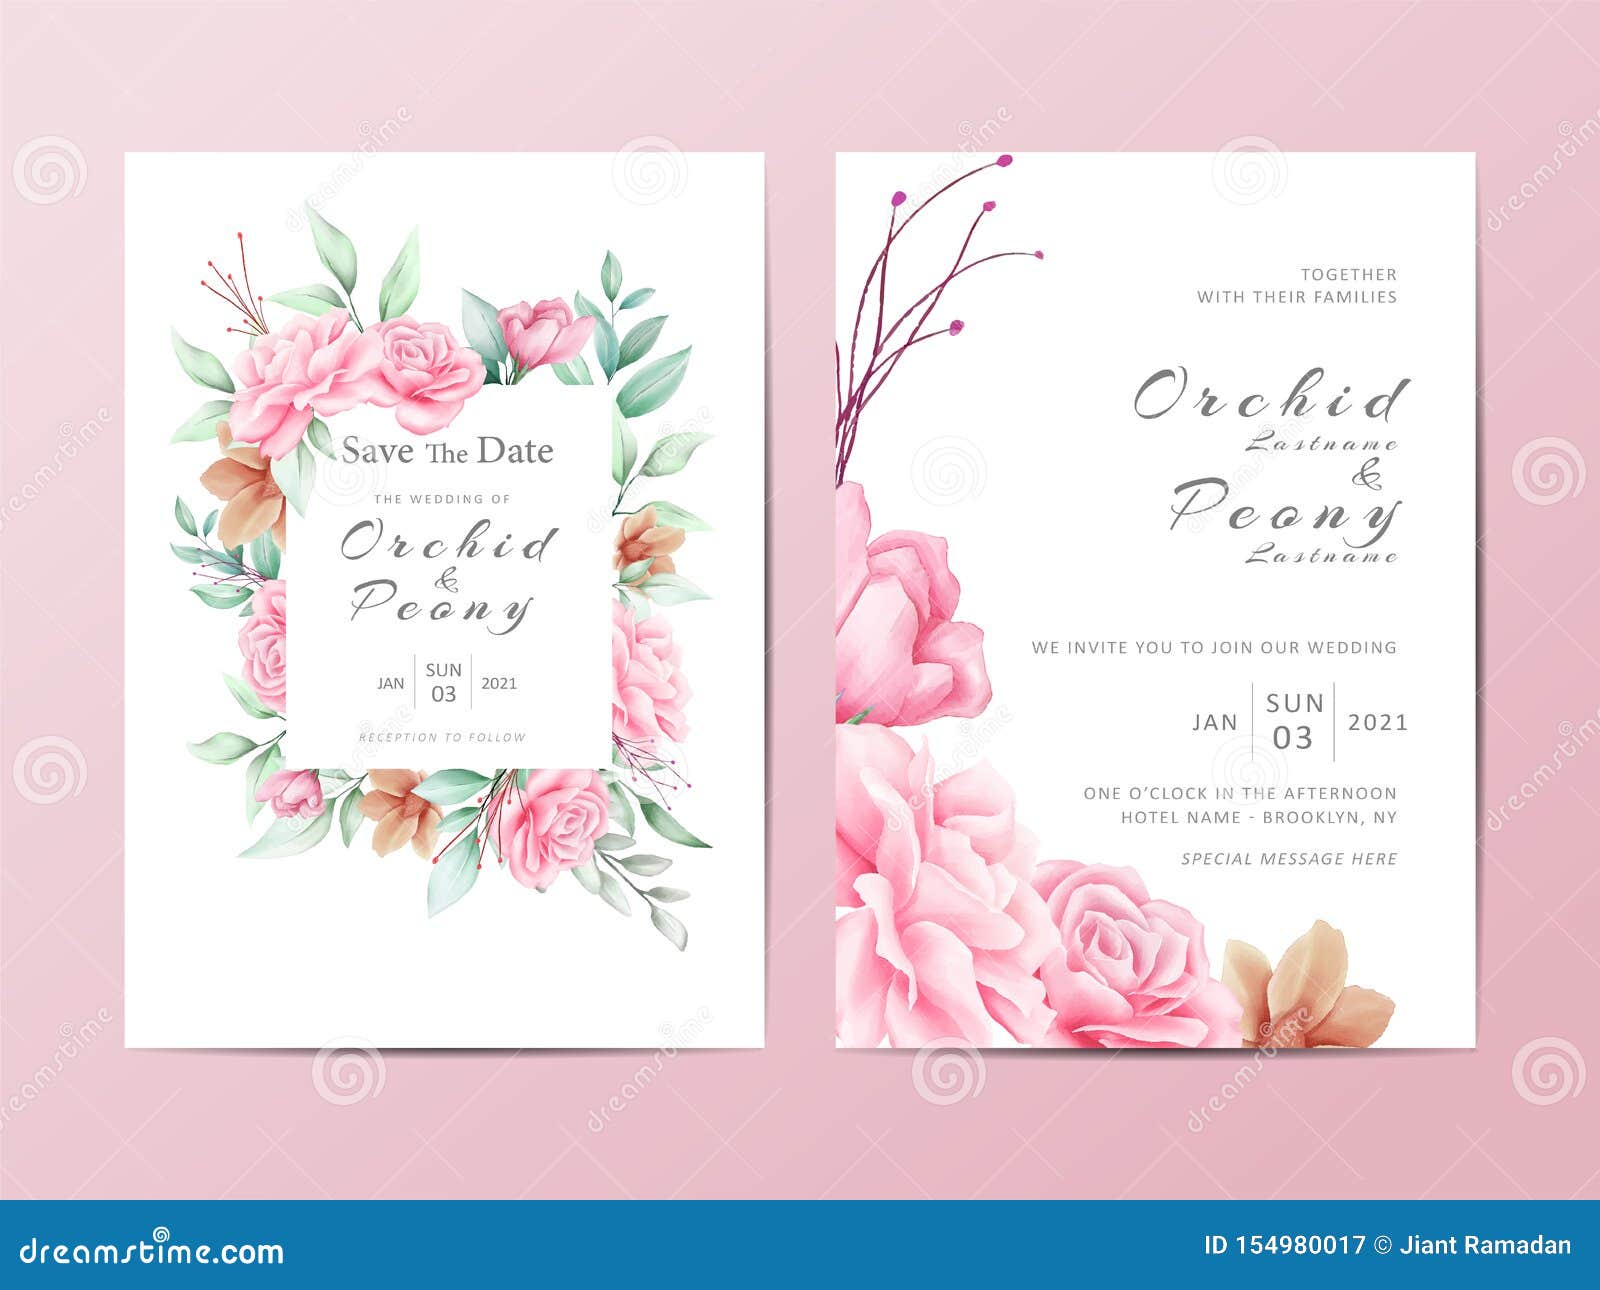 Cute Wedding Invitation Template Cards Set of Floral and Throughout Free E Wedding Invitation Card Templates